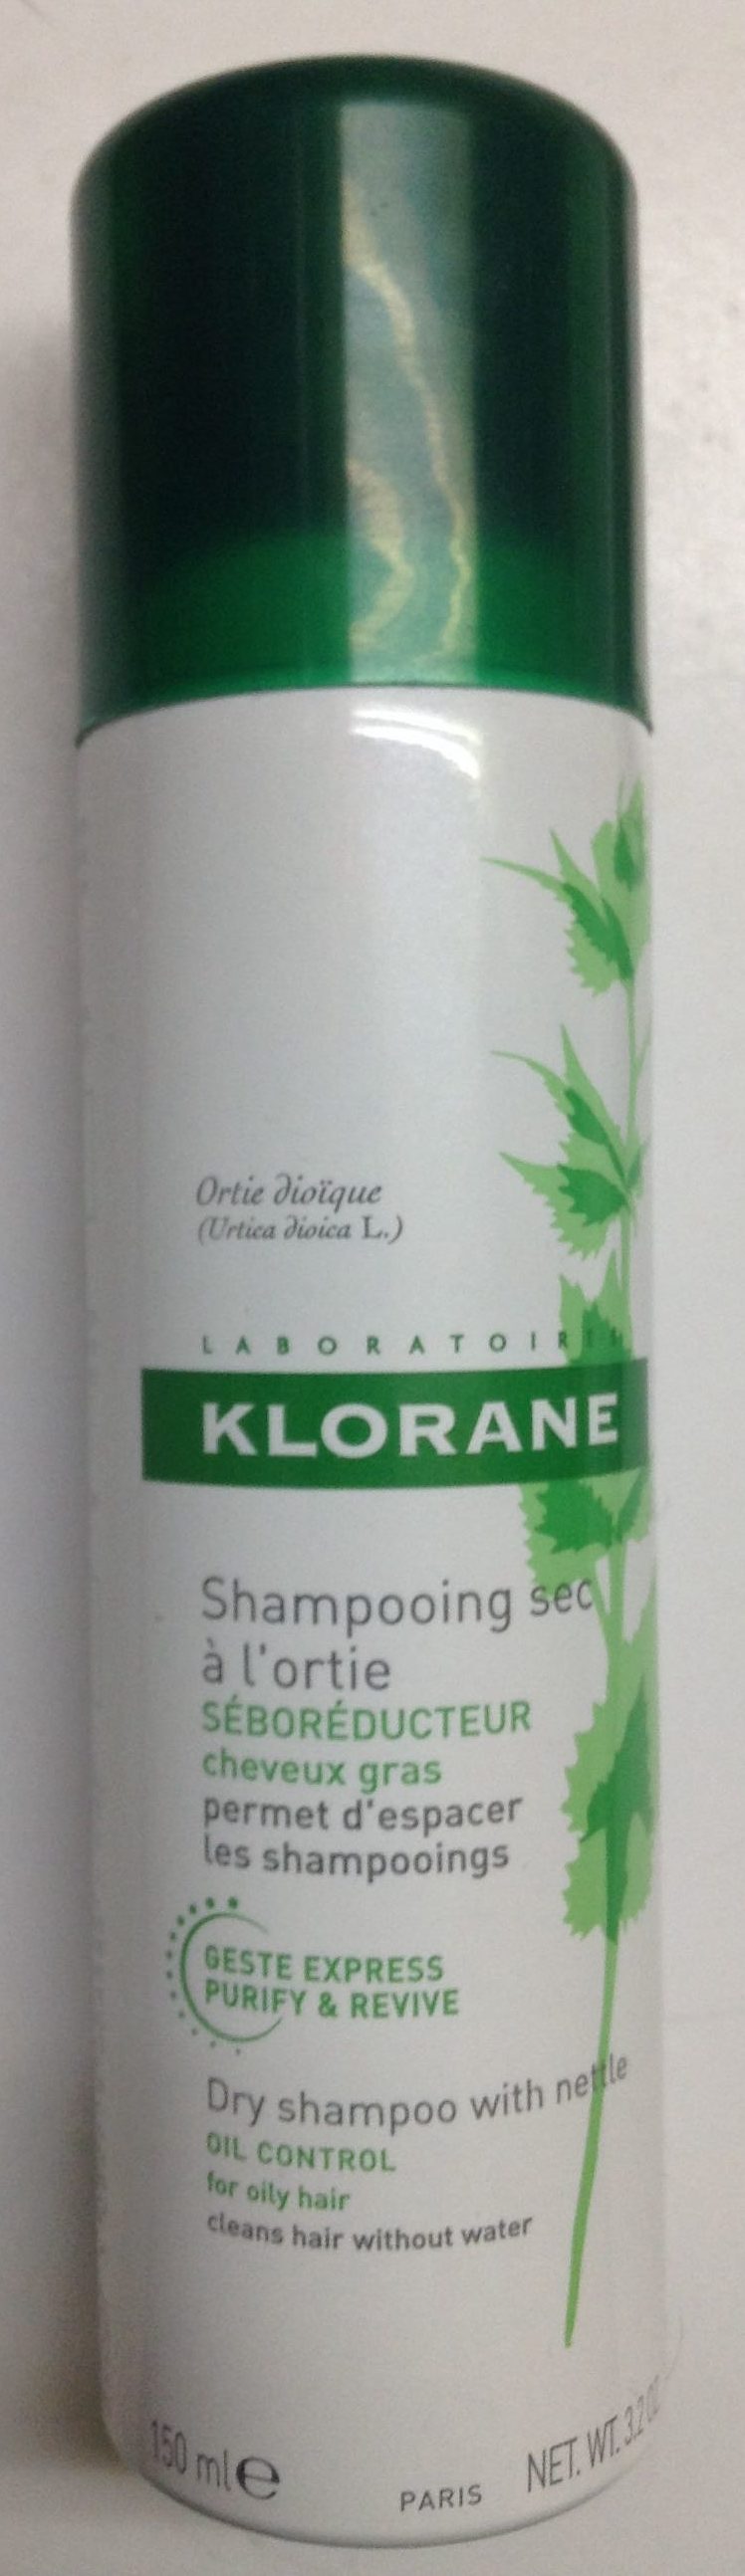 Shampooing sec à l'ortie - Product - fr